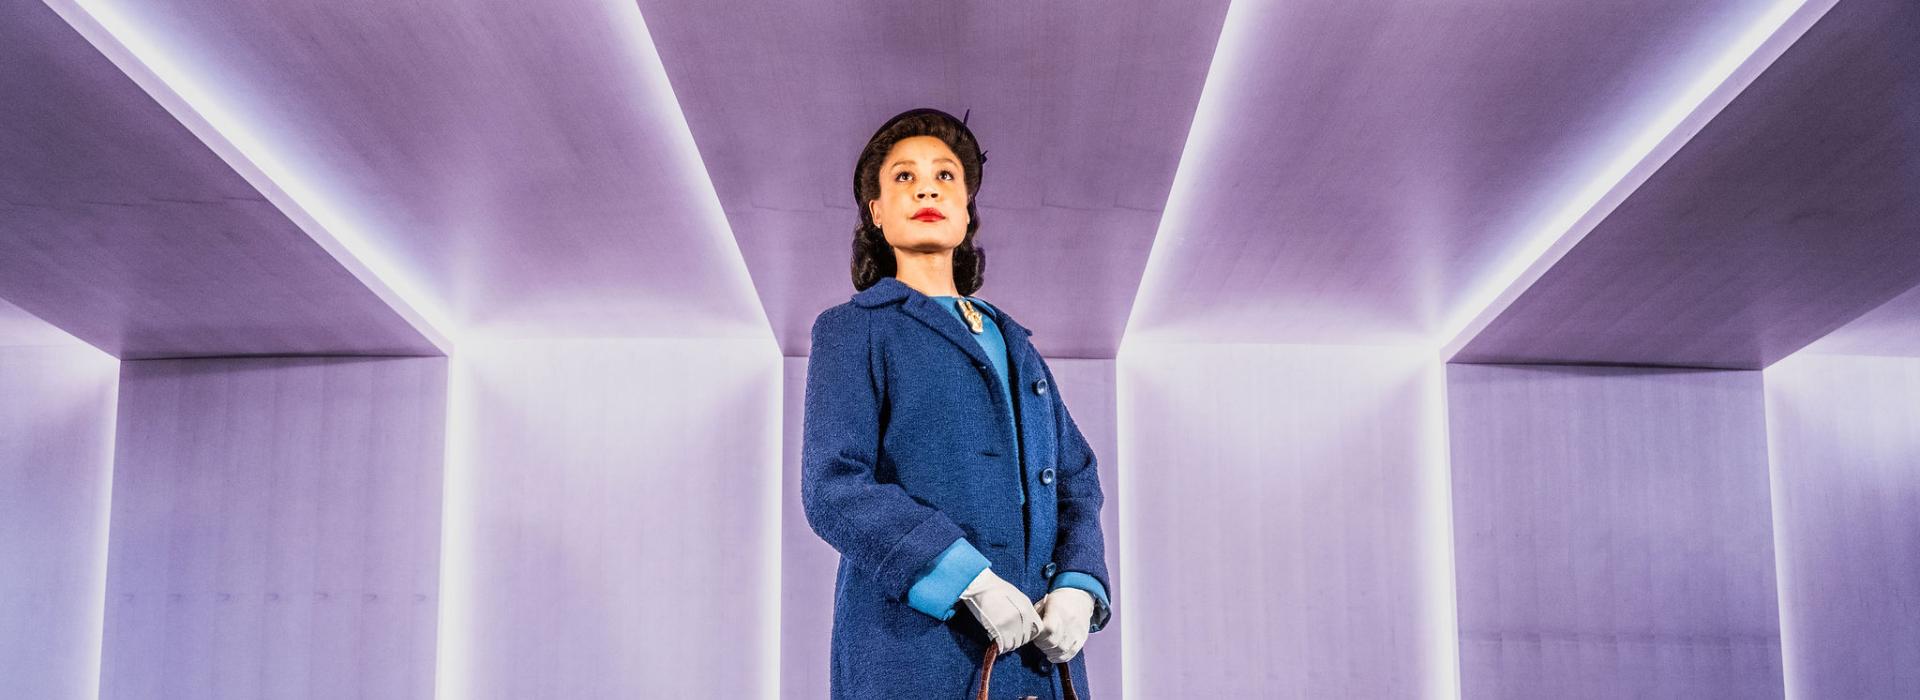 Beck Lloyd in character as Viola Desmond, stands in front of a light purple wall with vertical strips of light that continue along the ceiling.